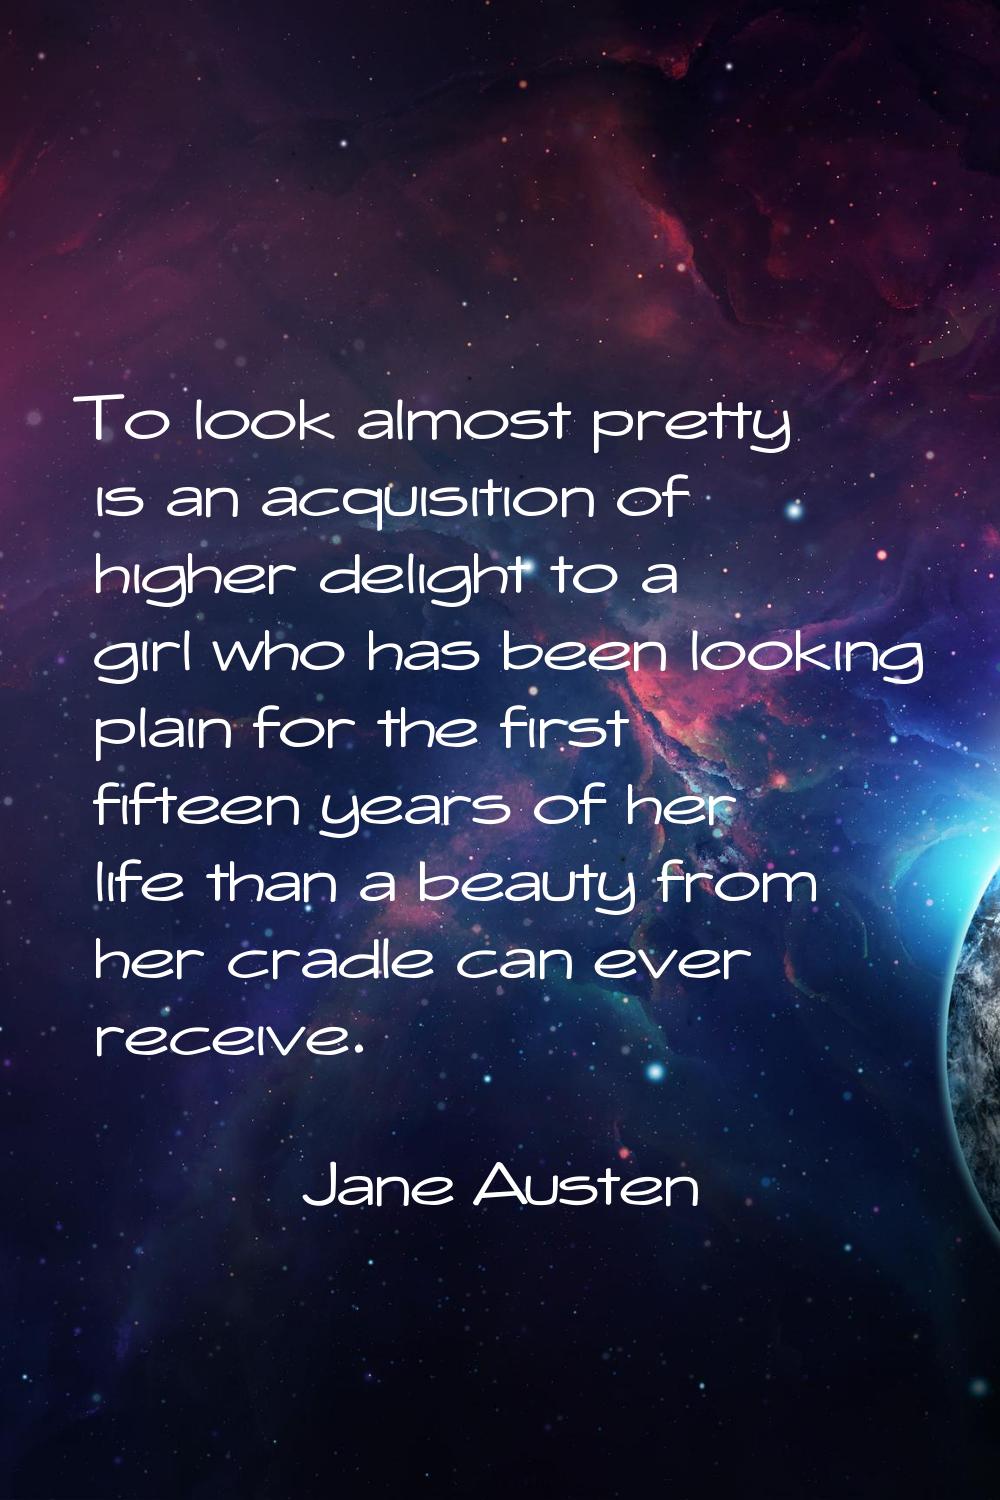 To look almost pretty is an acquisition of higher delight to a girl who has been looking plain for 